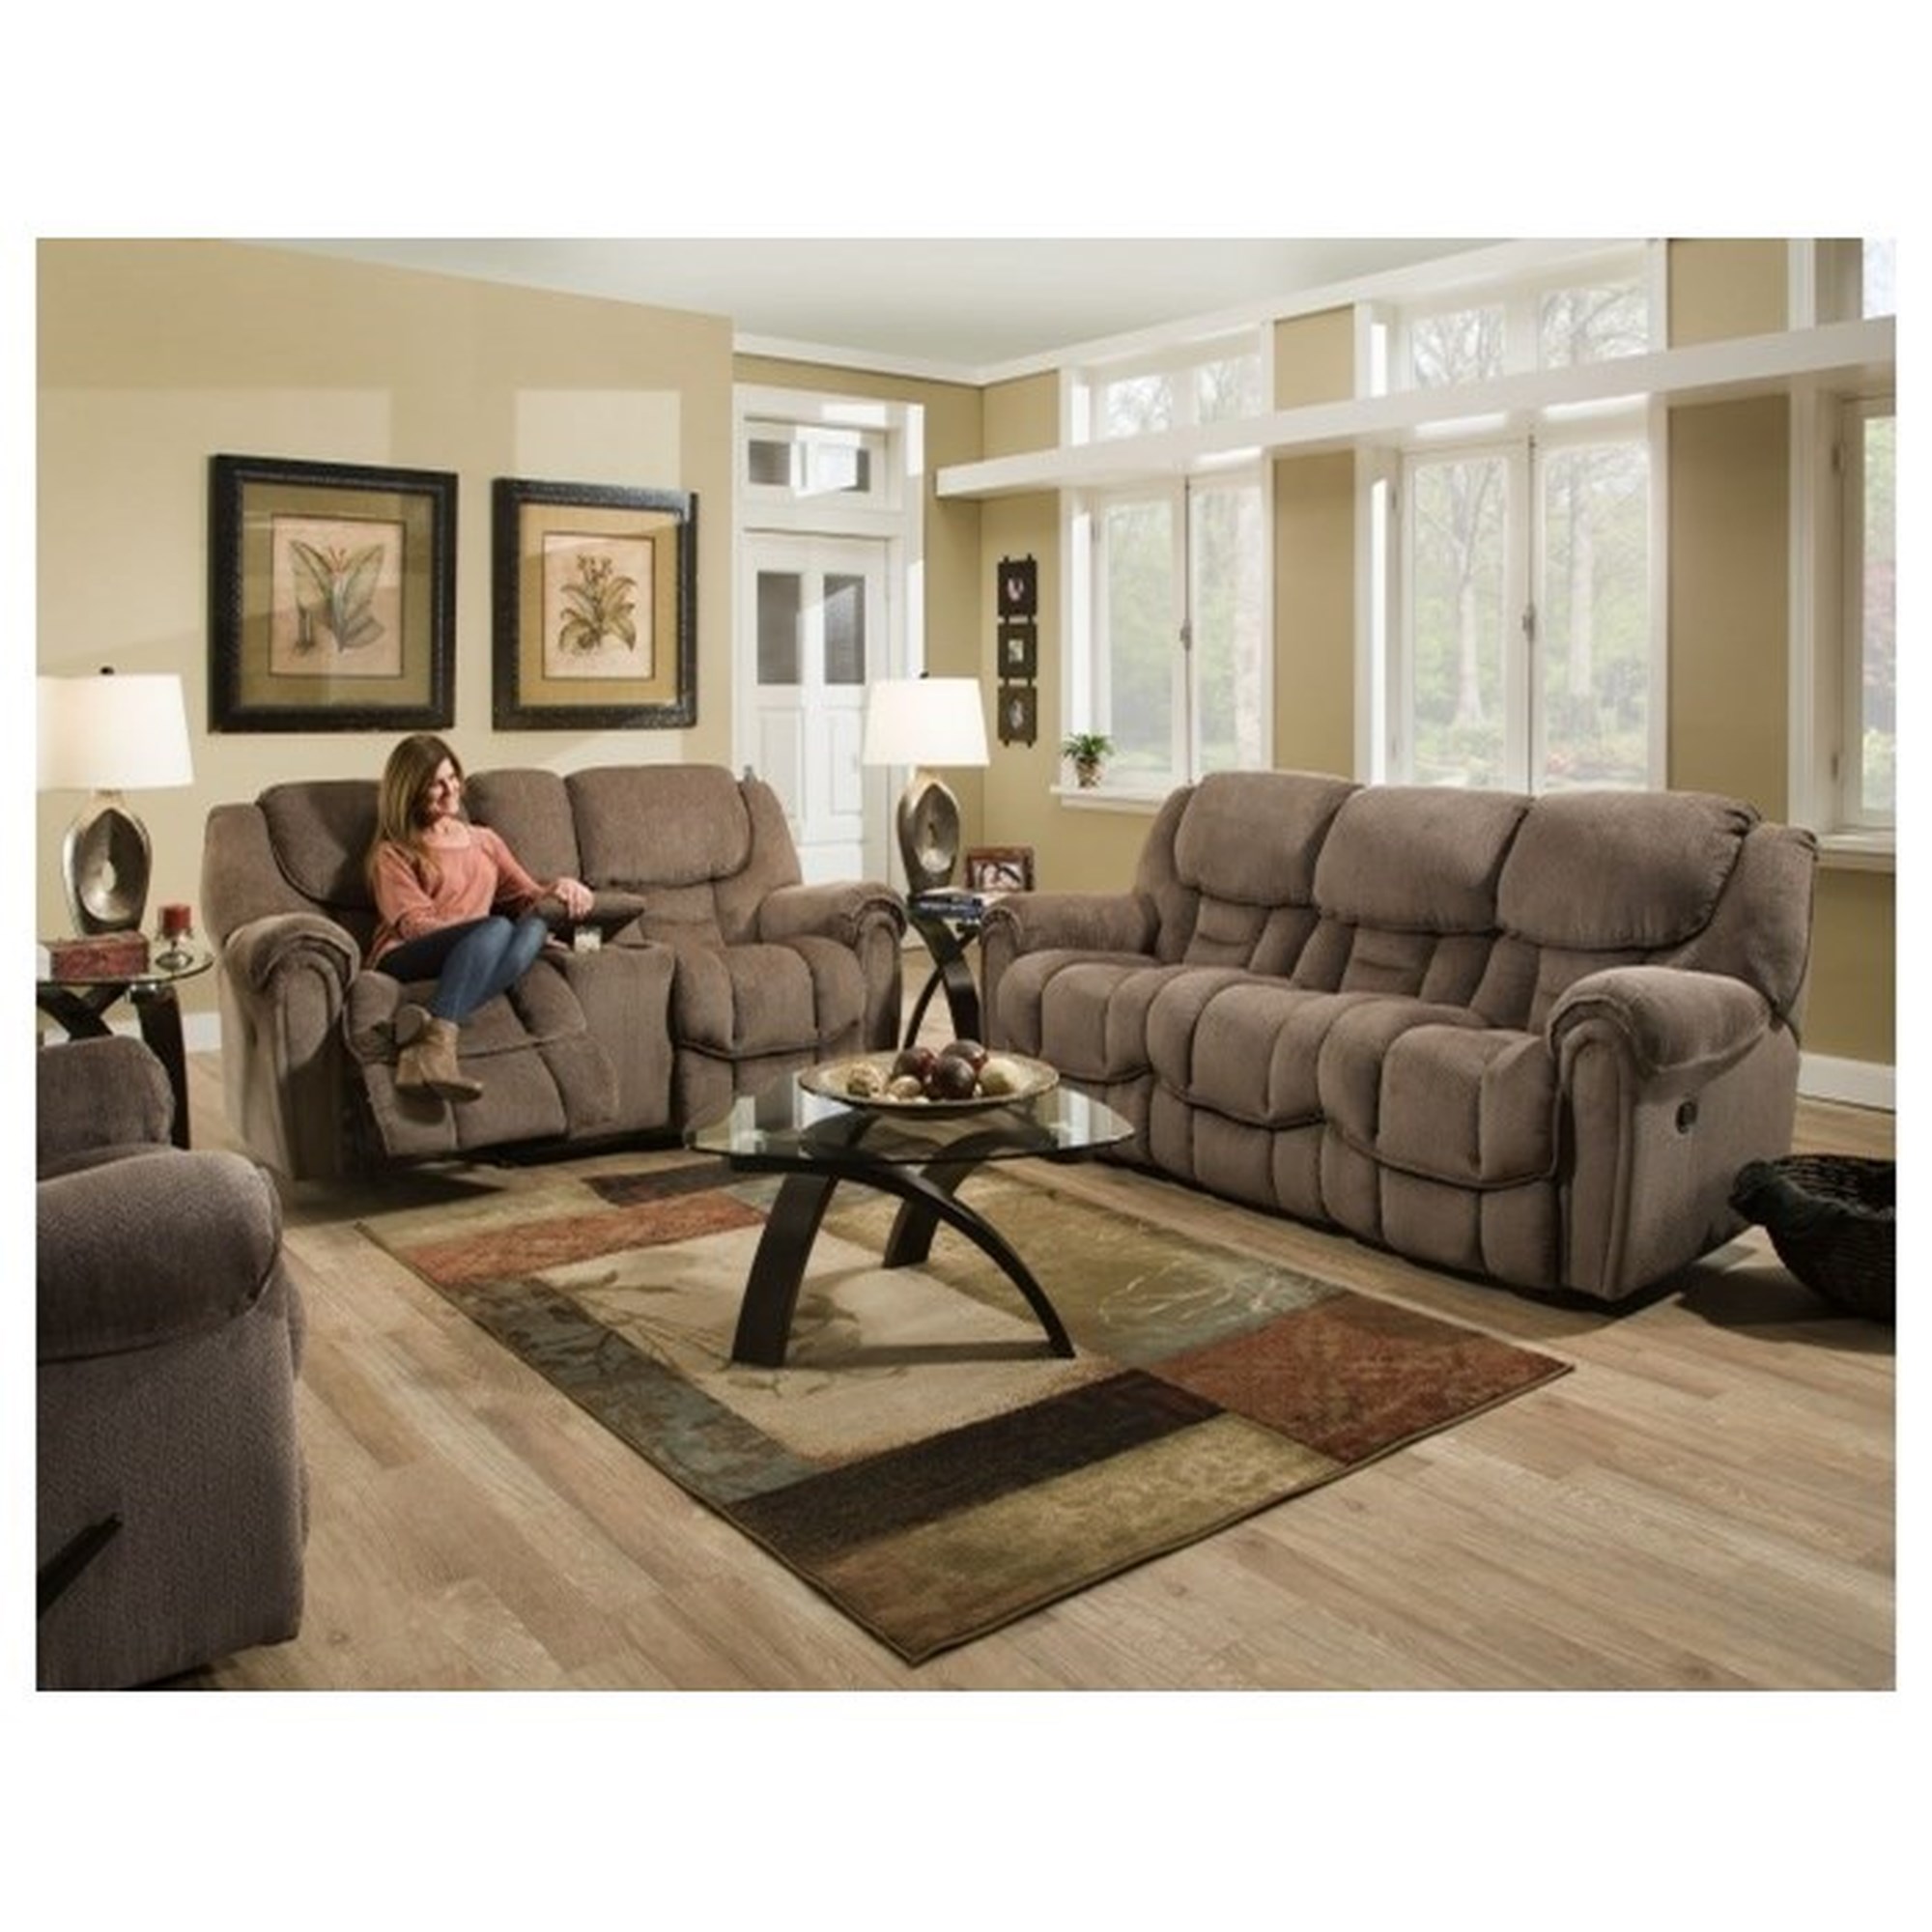 Homestretch 122 1317486 Casual Double Reclining Sofa With Pillow Arms Dunk And Bright Furniture